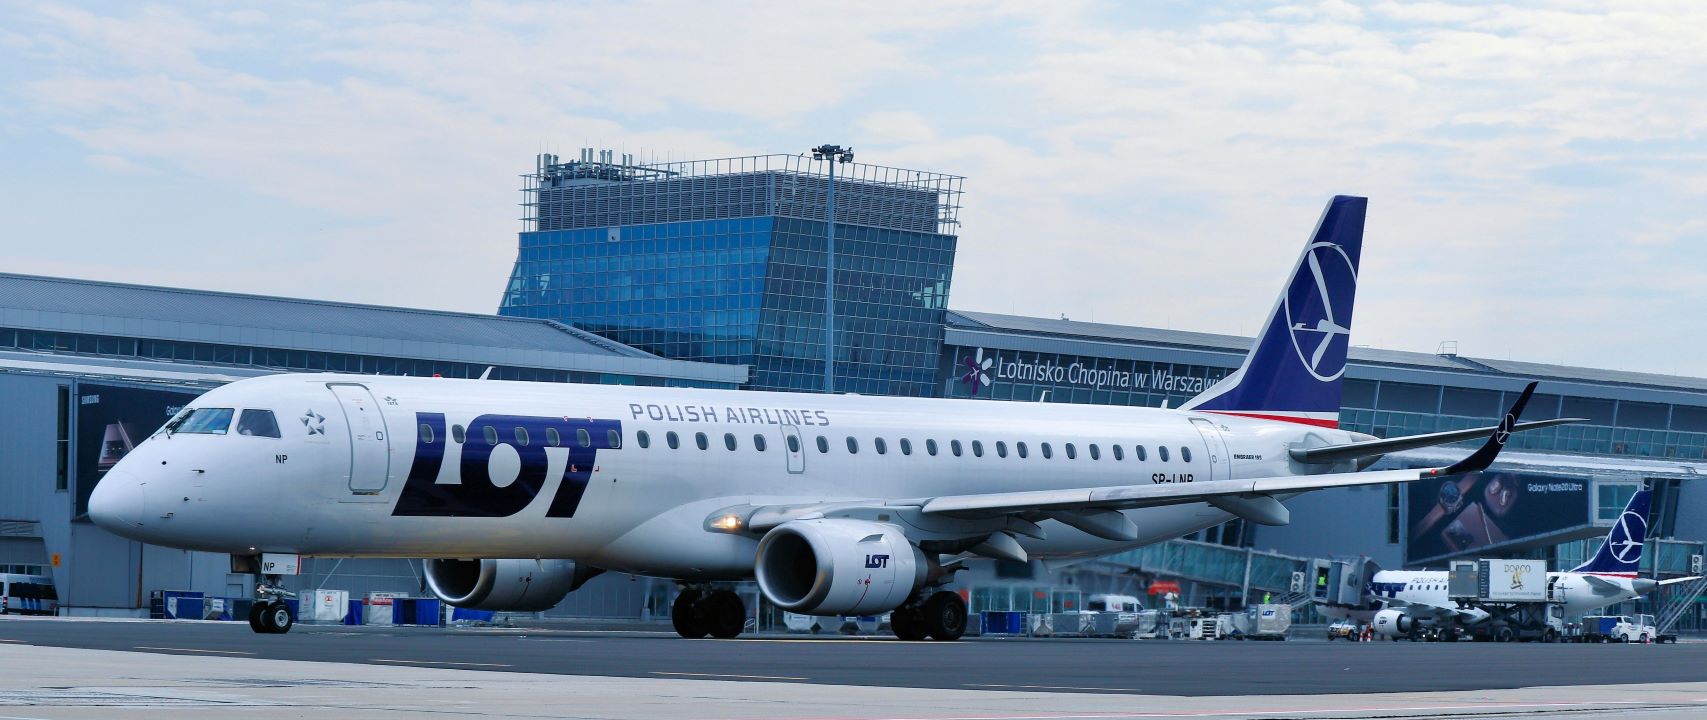 Explore more of Europe with LOT Polish Airlines as they commence flights to Lyon, France.